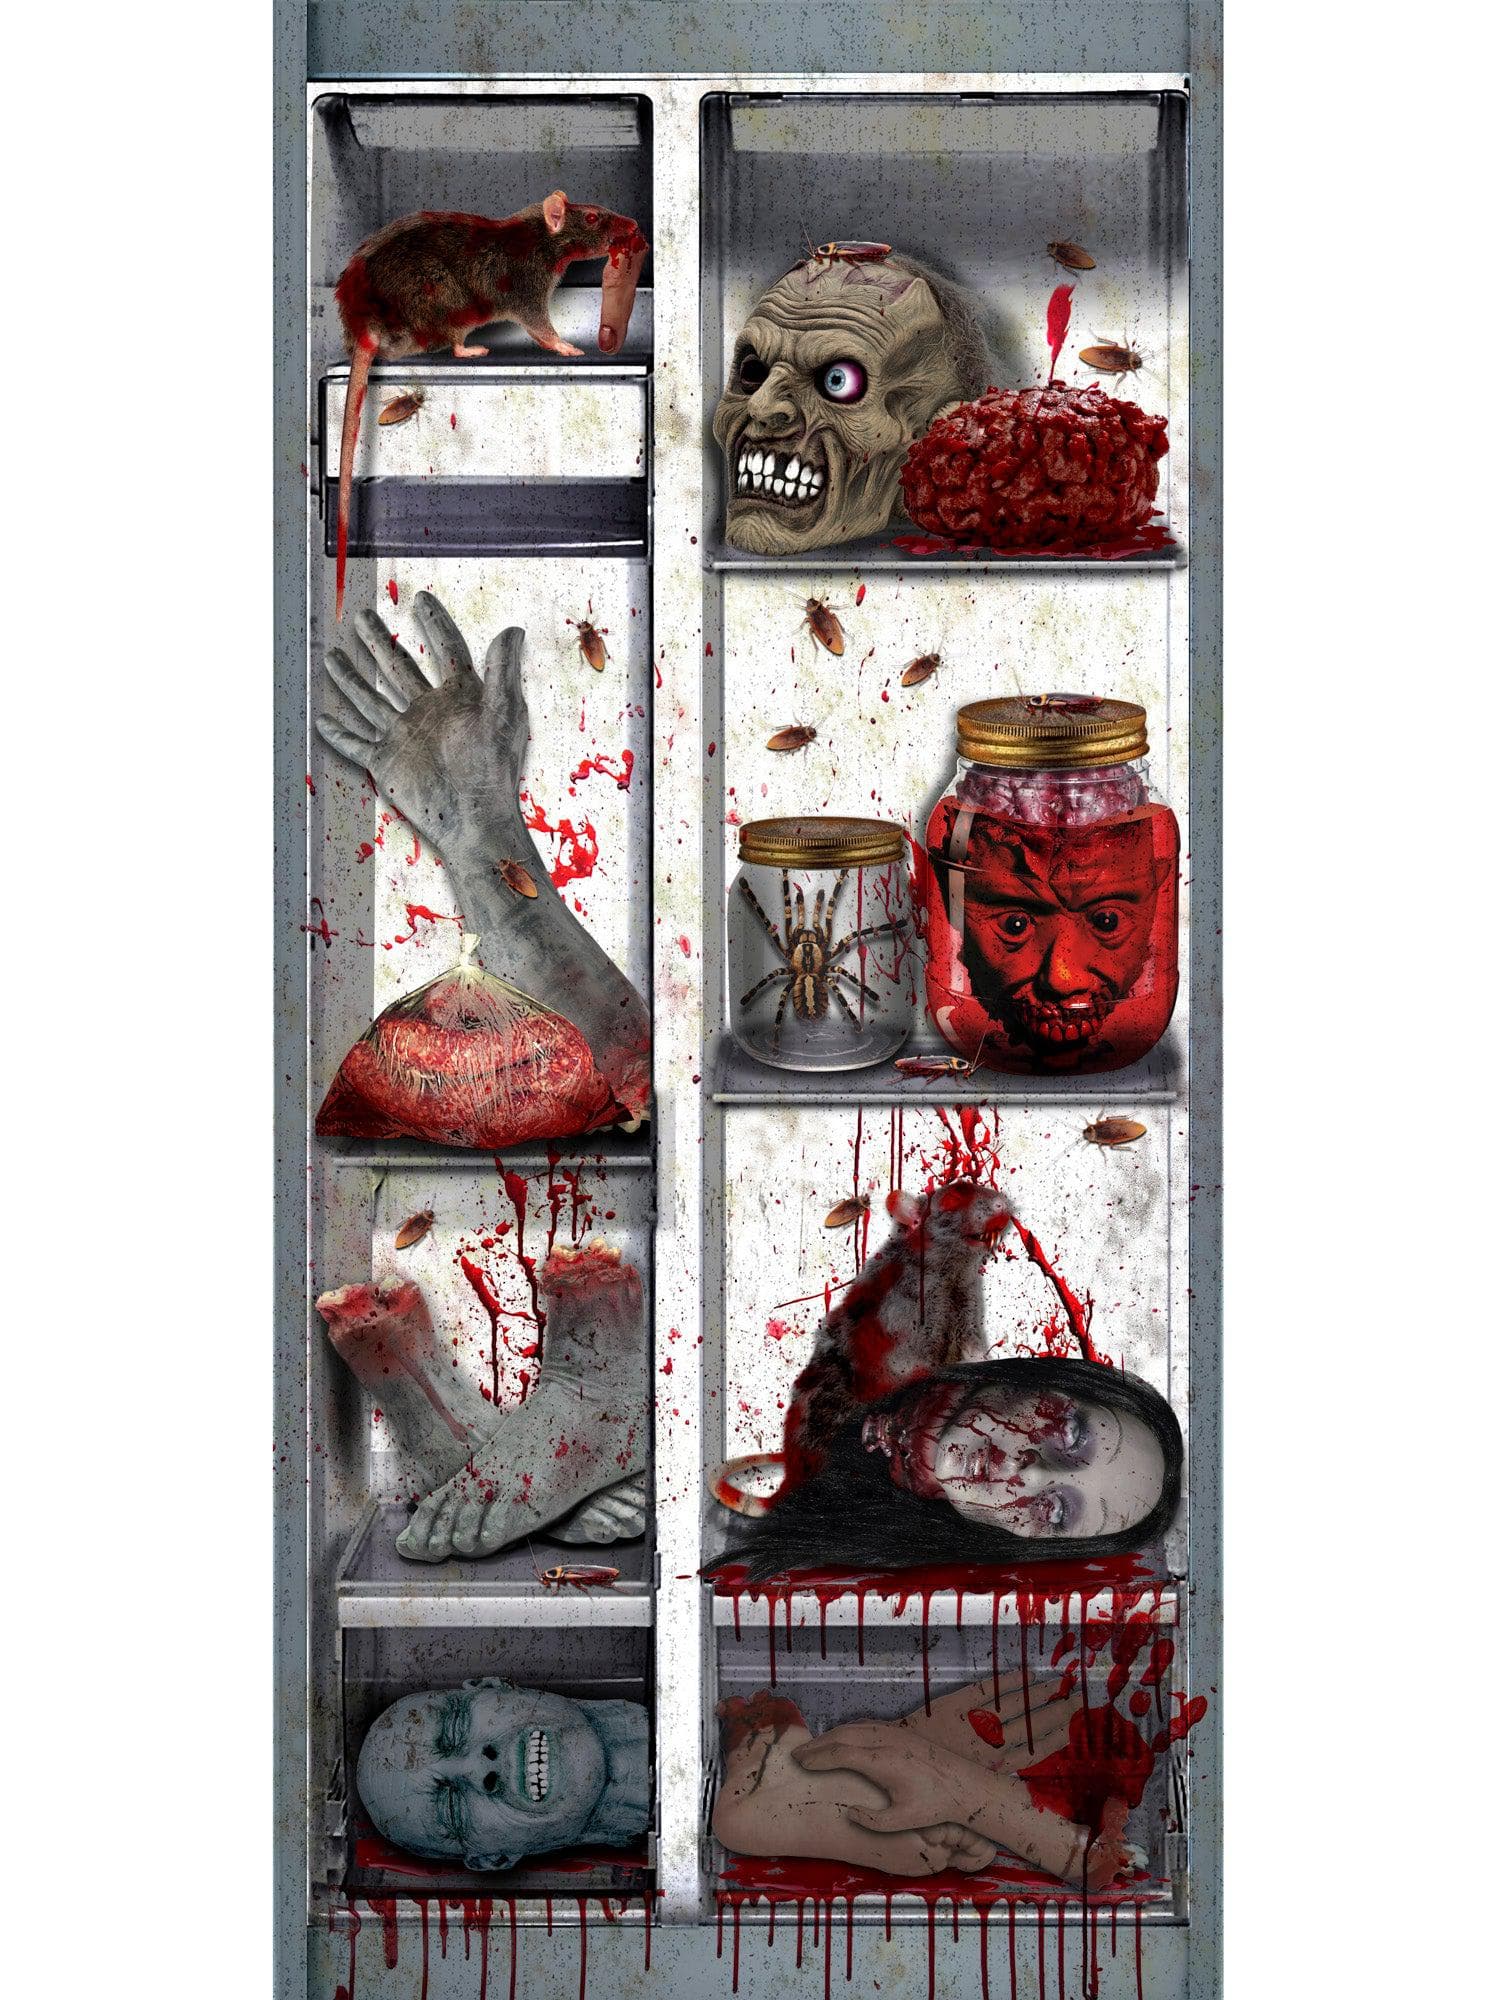 5 Foot Bloody Mess Refrigerator Cover Decoration - costumes.com